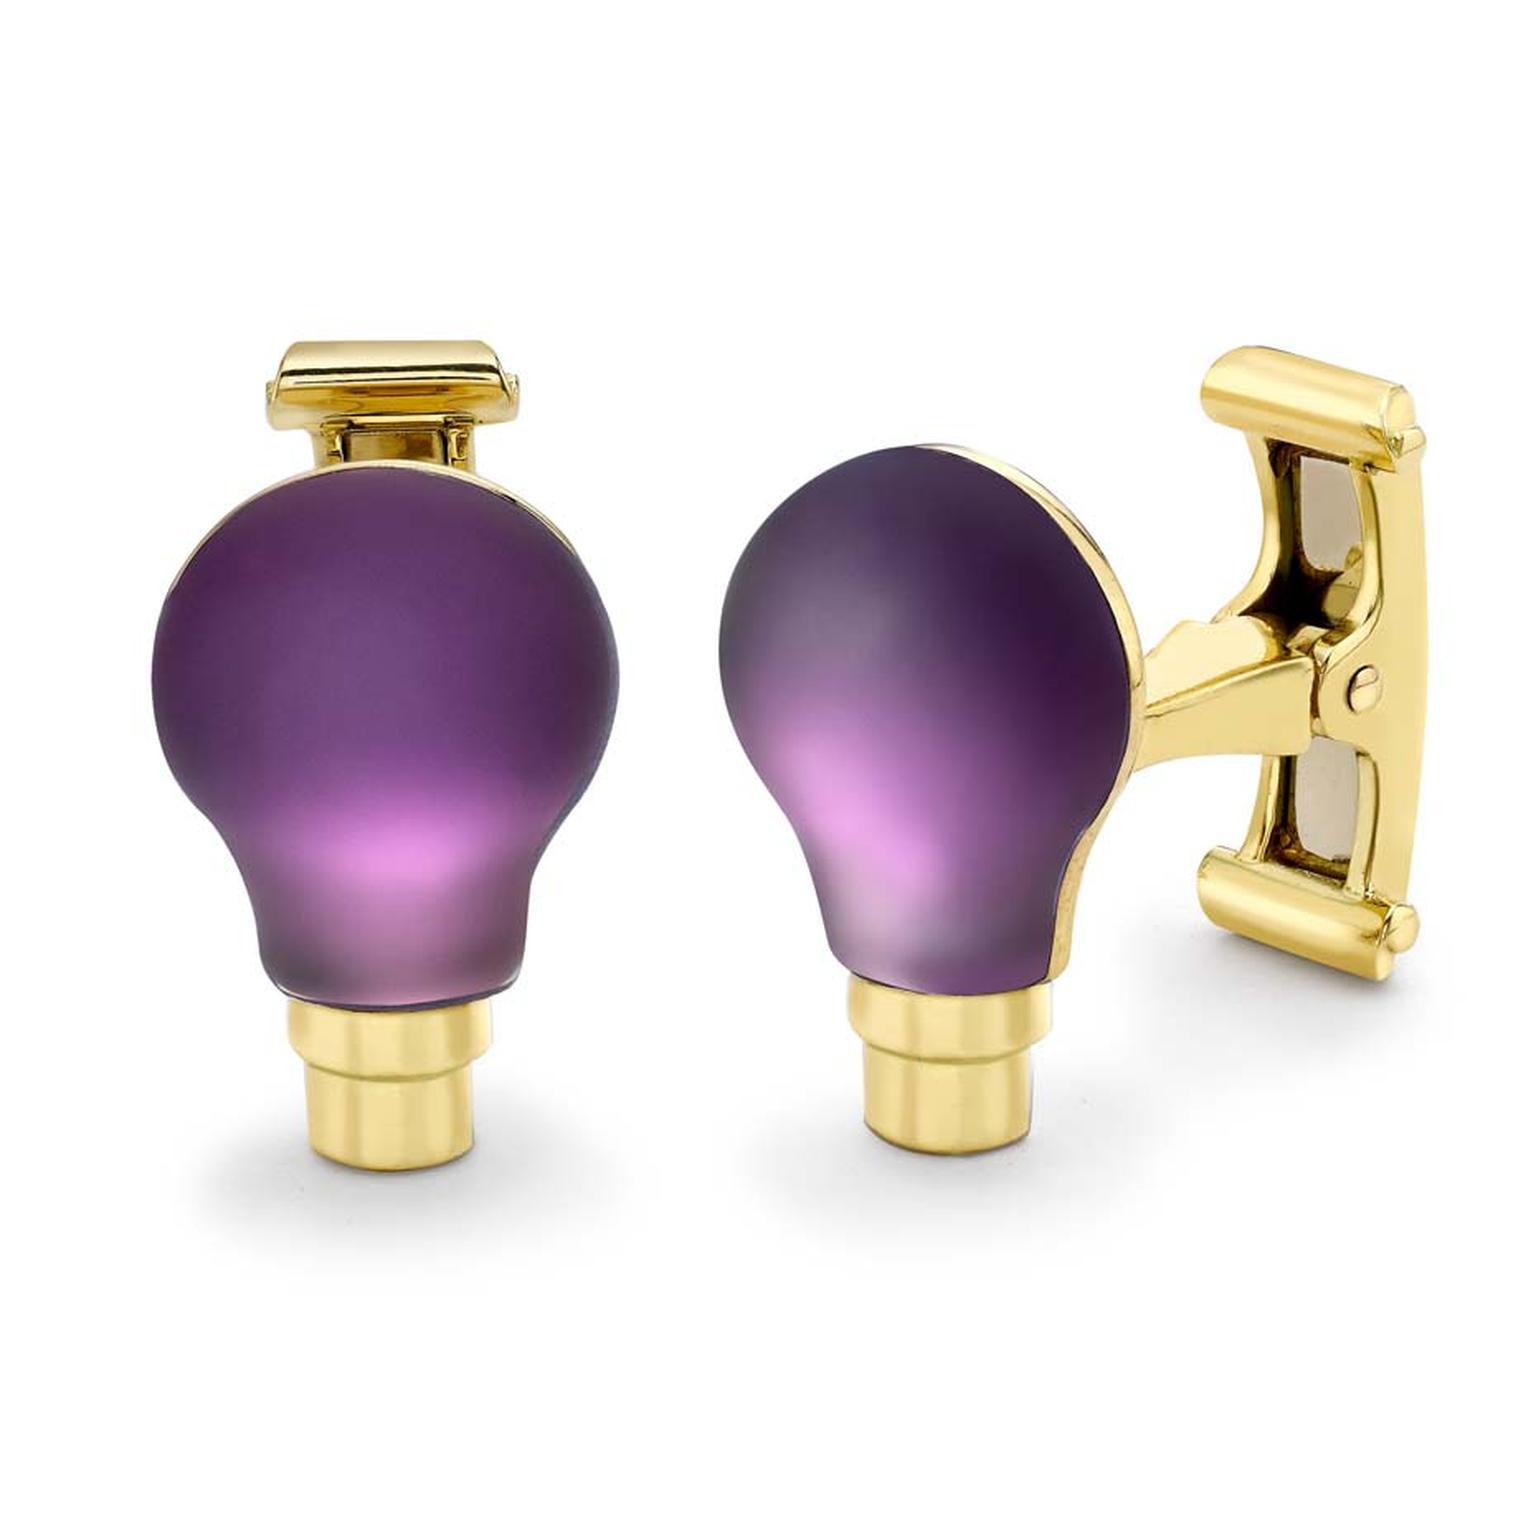 Theo Fennell amethyst cufflinks in the shape of a classic Halogen light bulb (£3,500).